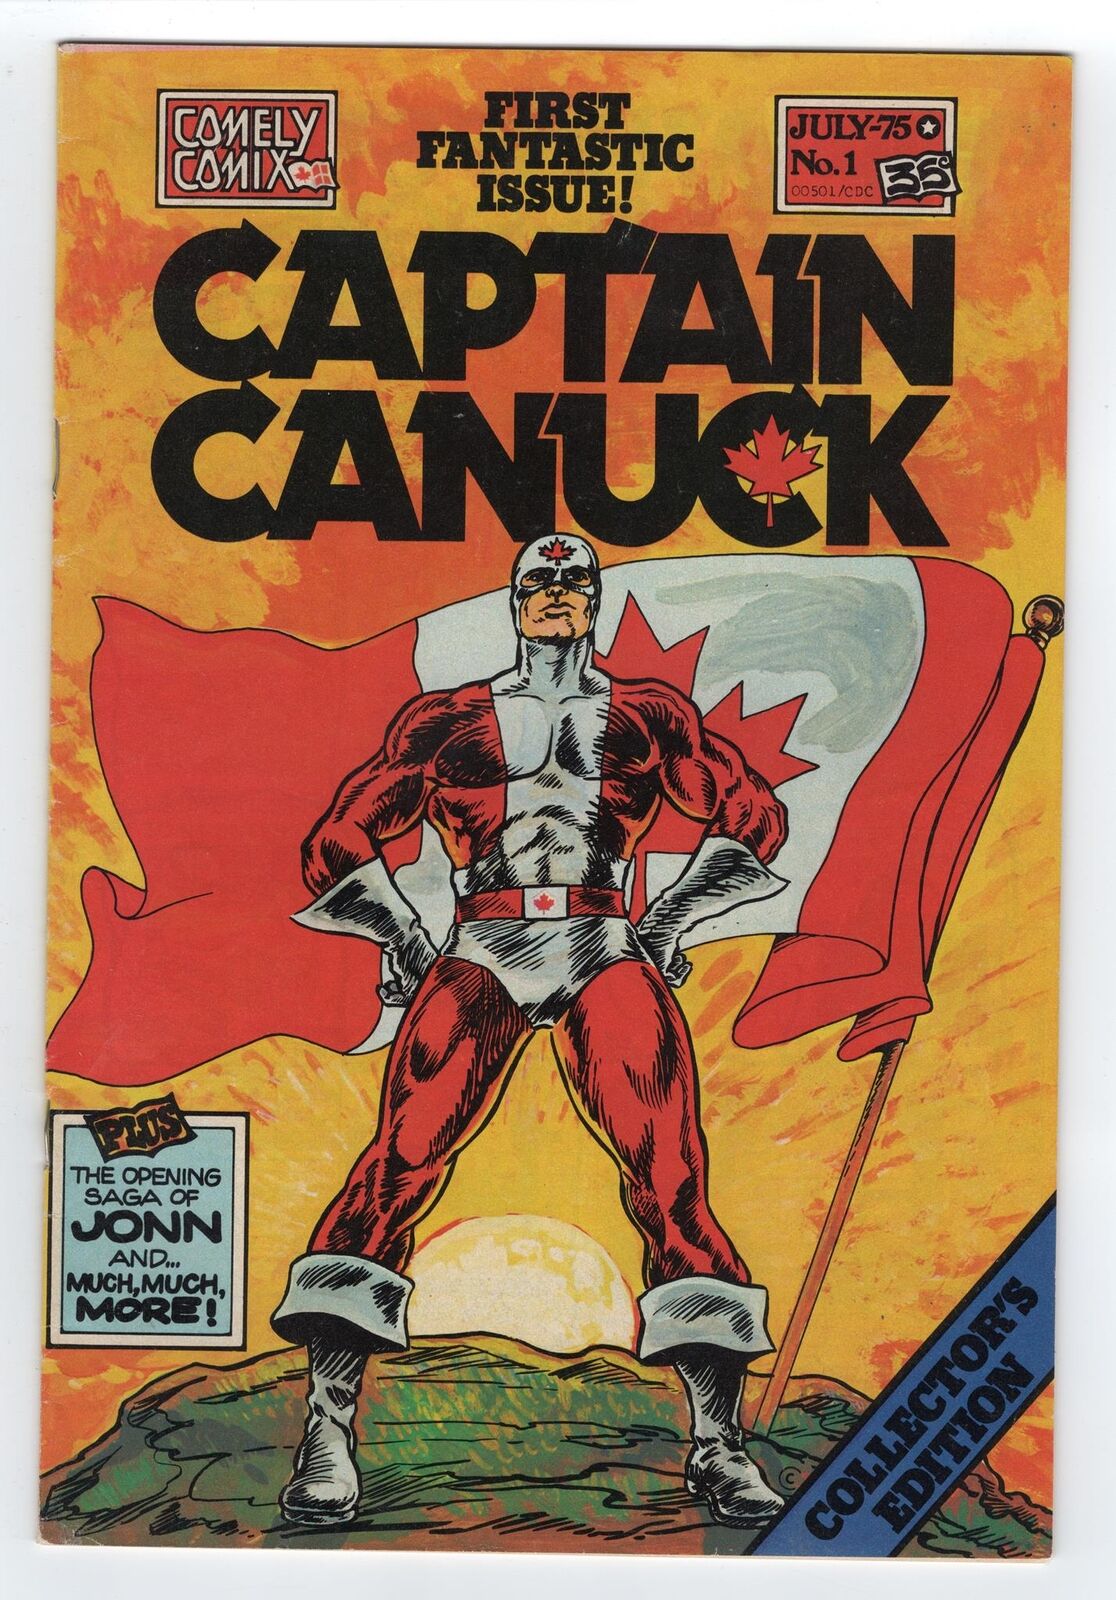 1975 COMELY COMIX CAPTAIN CANUCK #1 1ST APP OF CAPTAIN CANUCK RARE HIGH GRADE